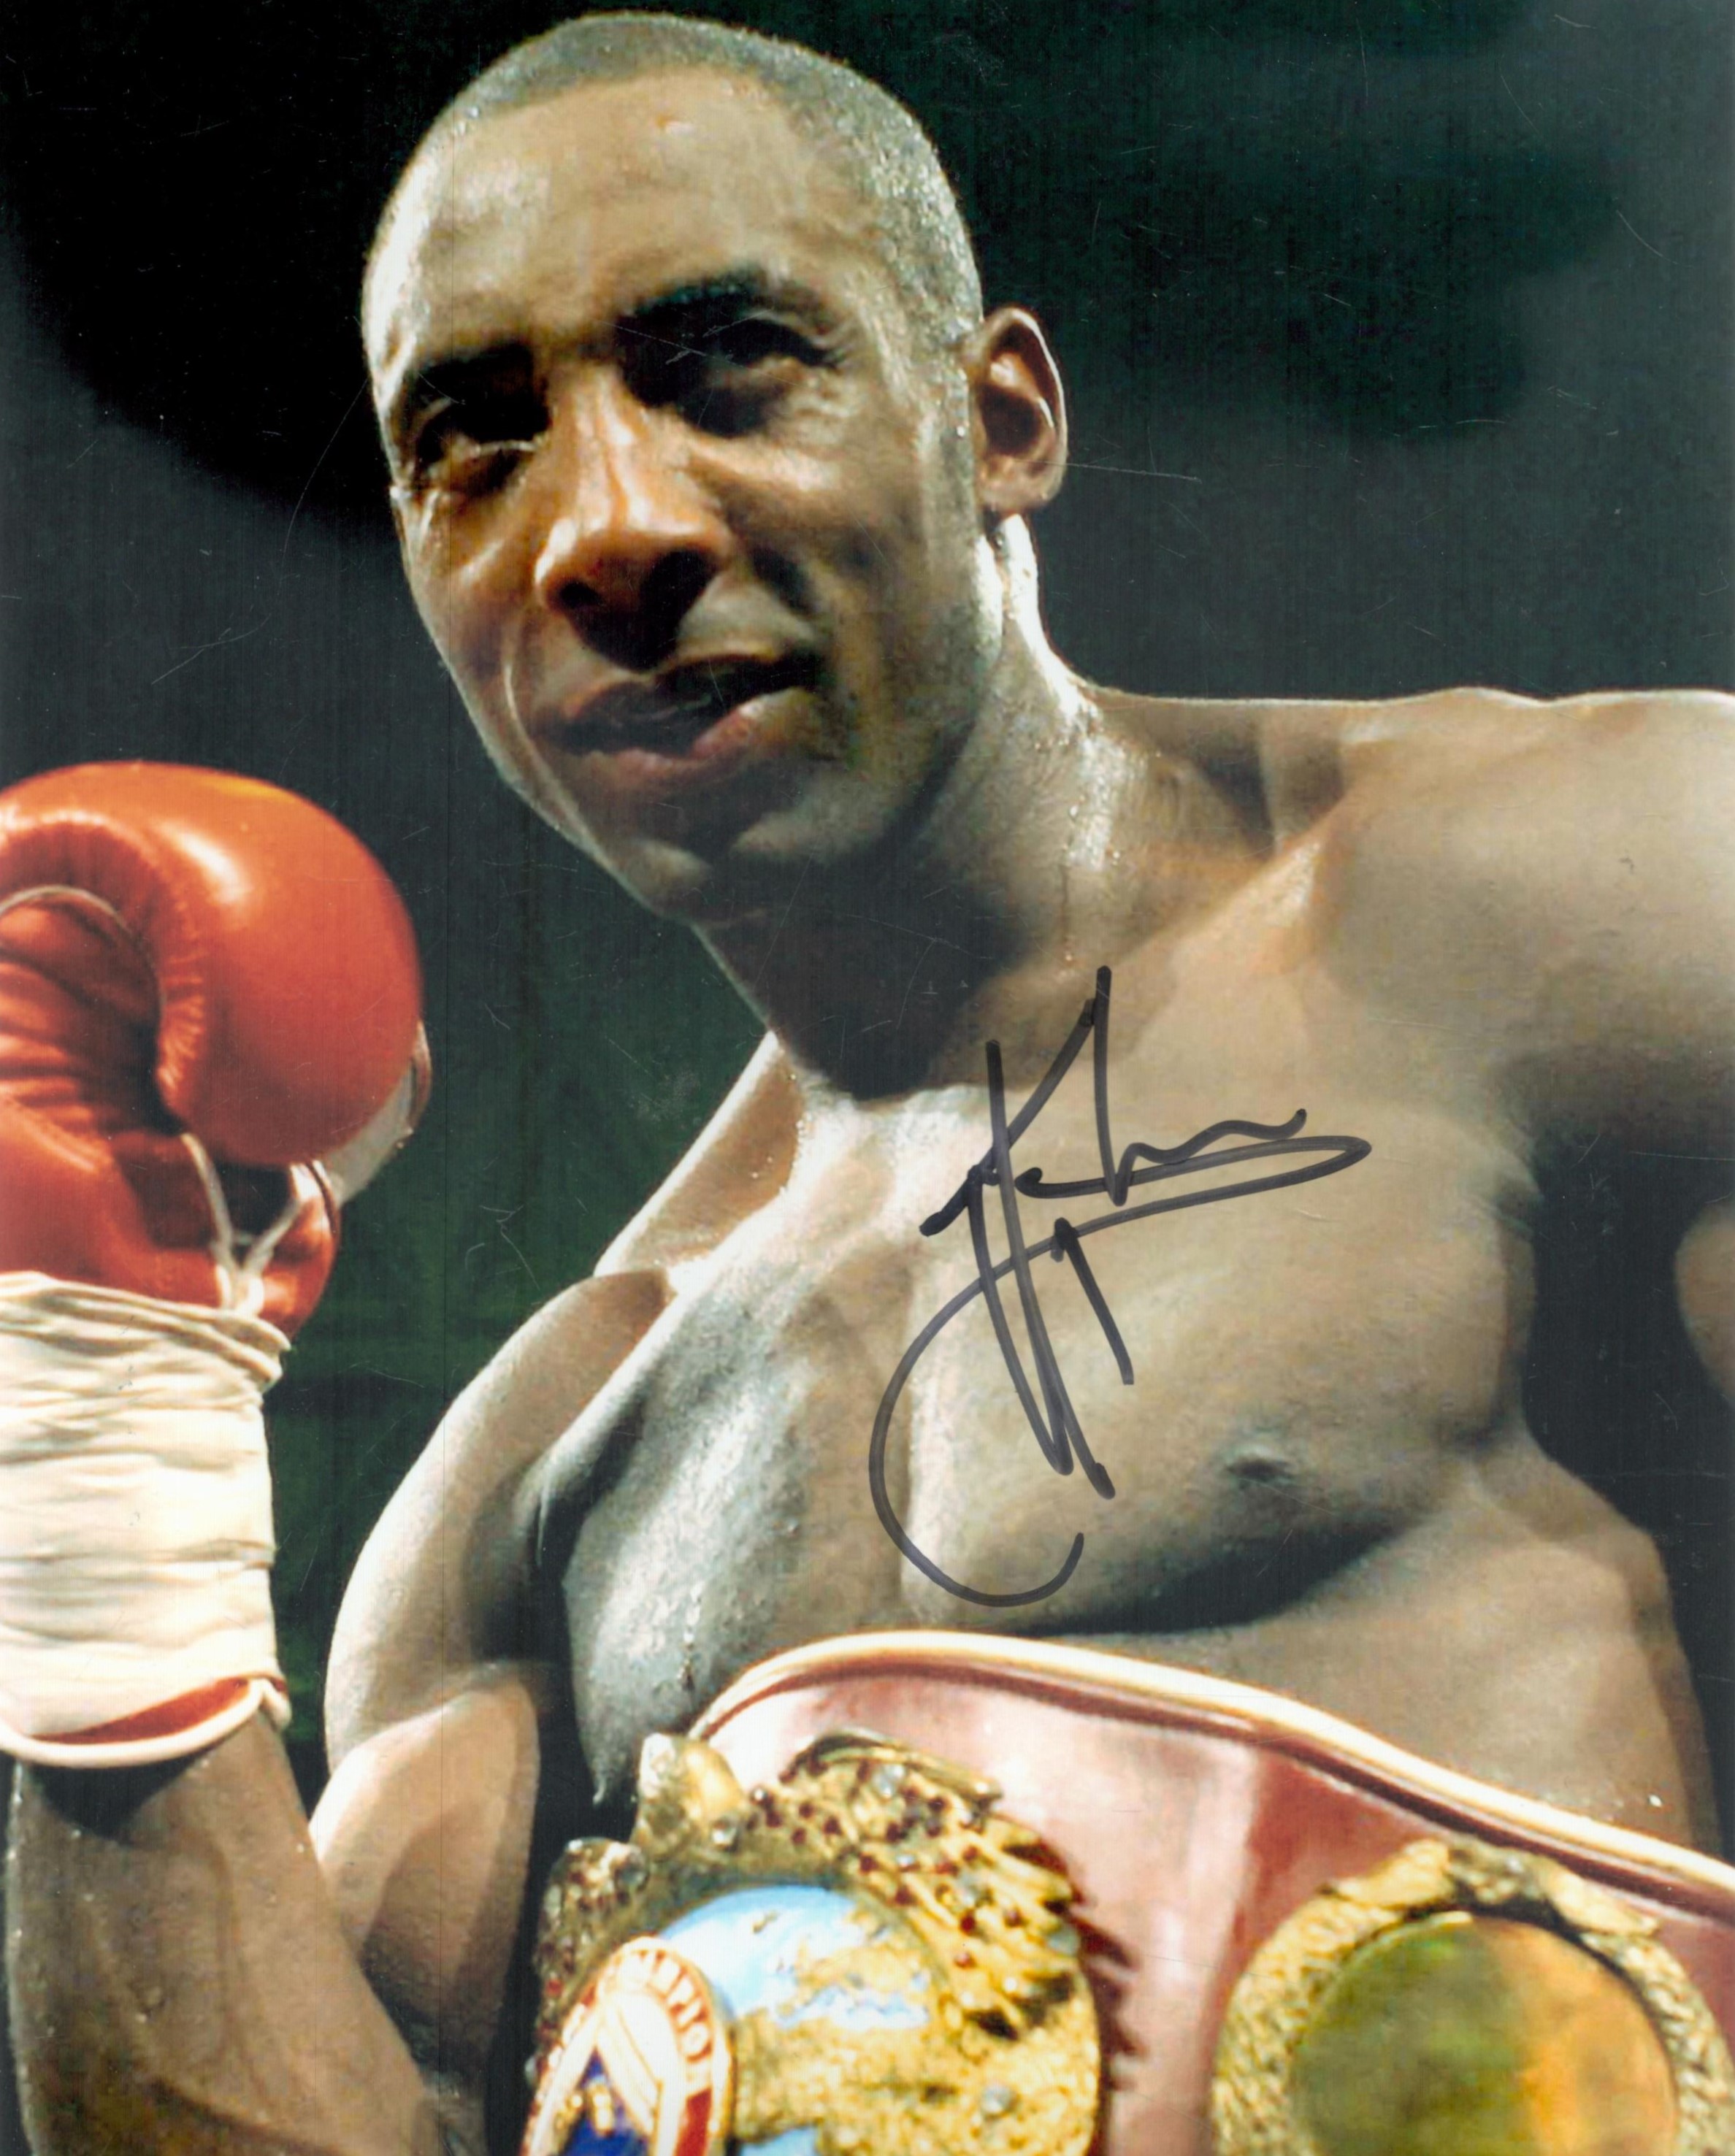 Johnny Nelson signed Colour Photo 10x8 Inch. Good condition. All autographs are genuine hand